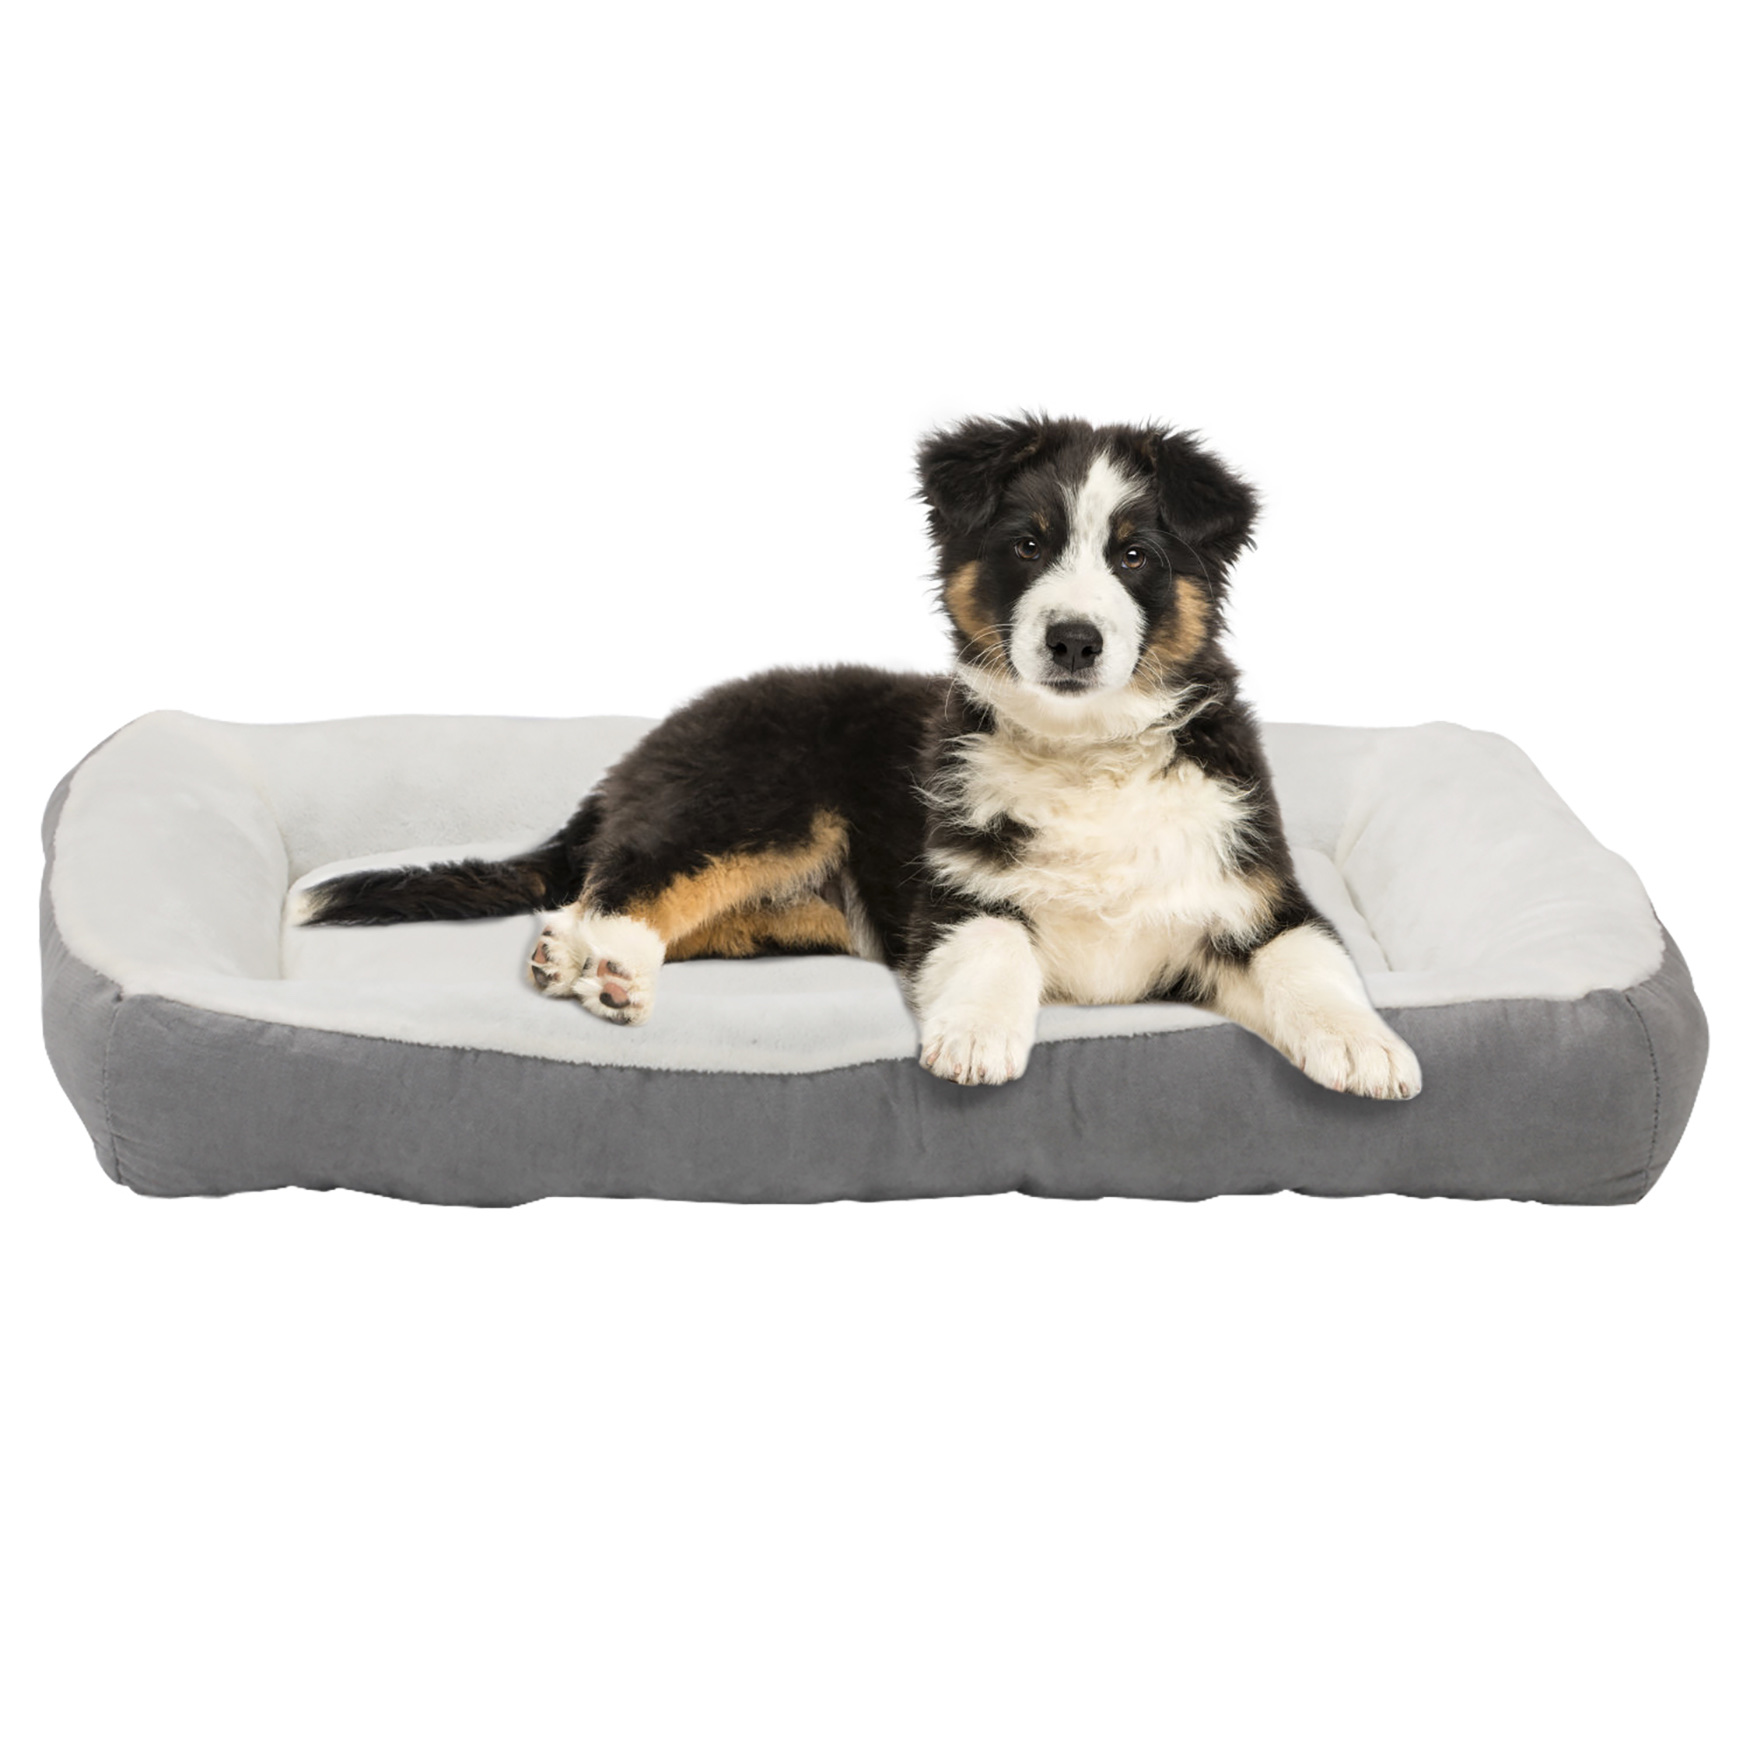 Happycare Tex Rectangle large Gray bumper pet bed, 40 x 30 inches, high quality plush cover and non-slip buttom, GRAY